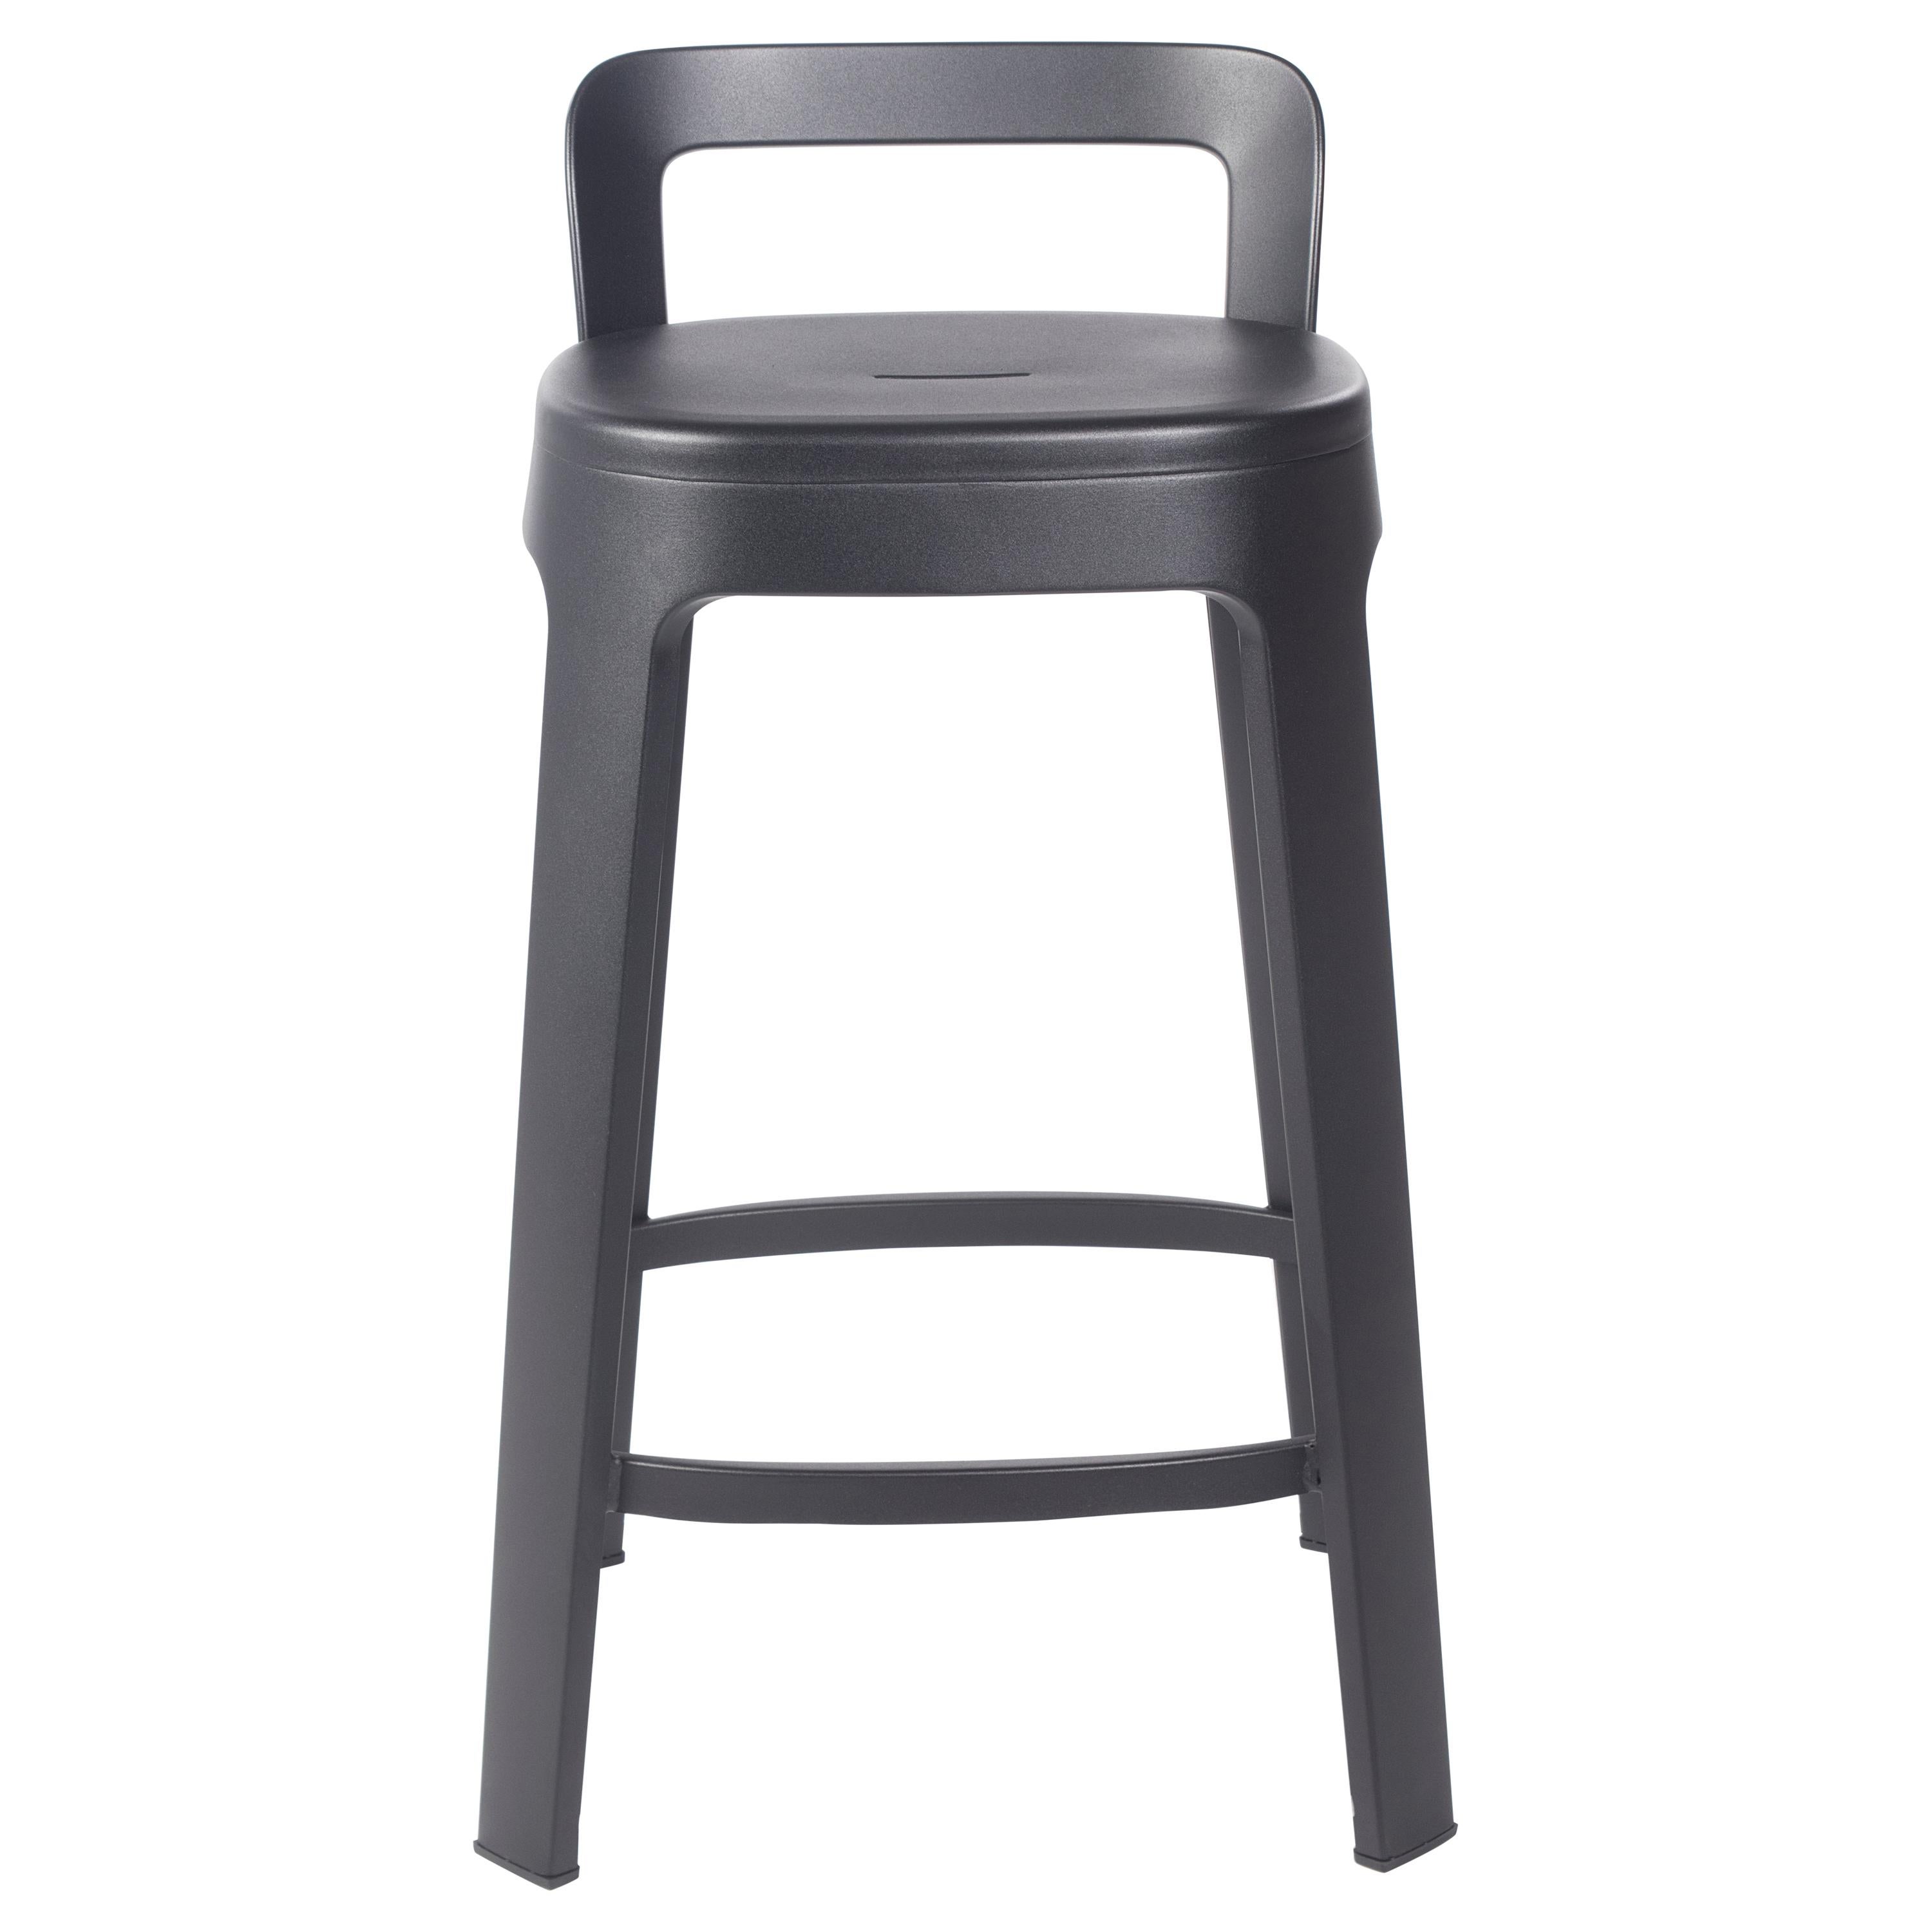 Ombra Counter Stool with Backrest, Black by Emiliana Design Studio For Sale